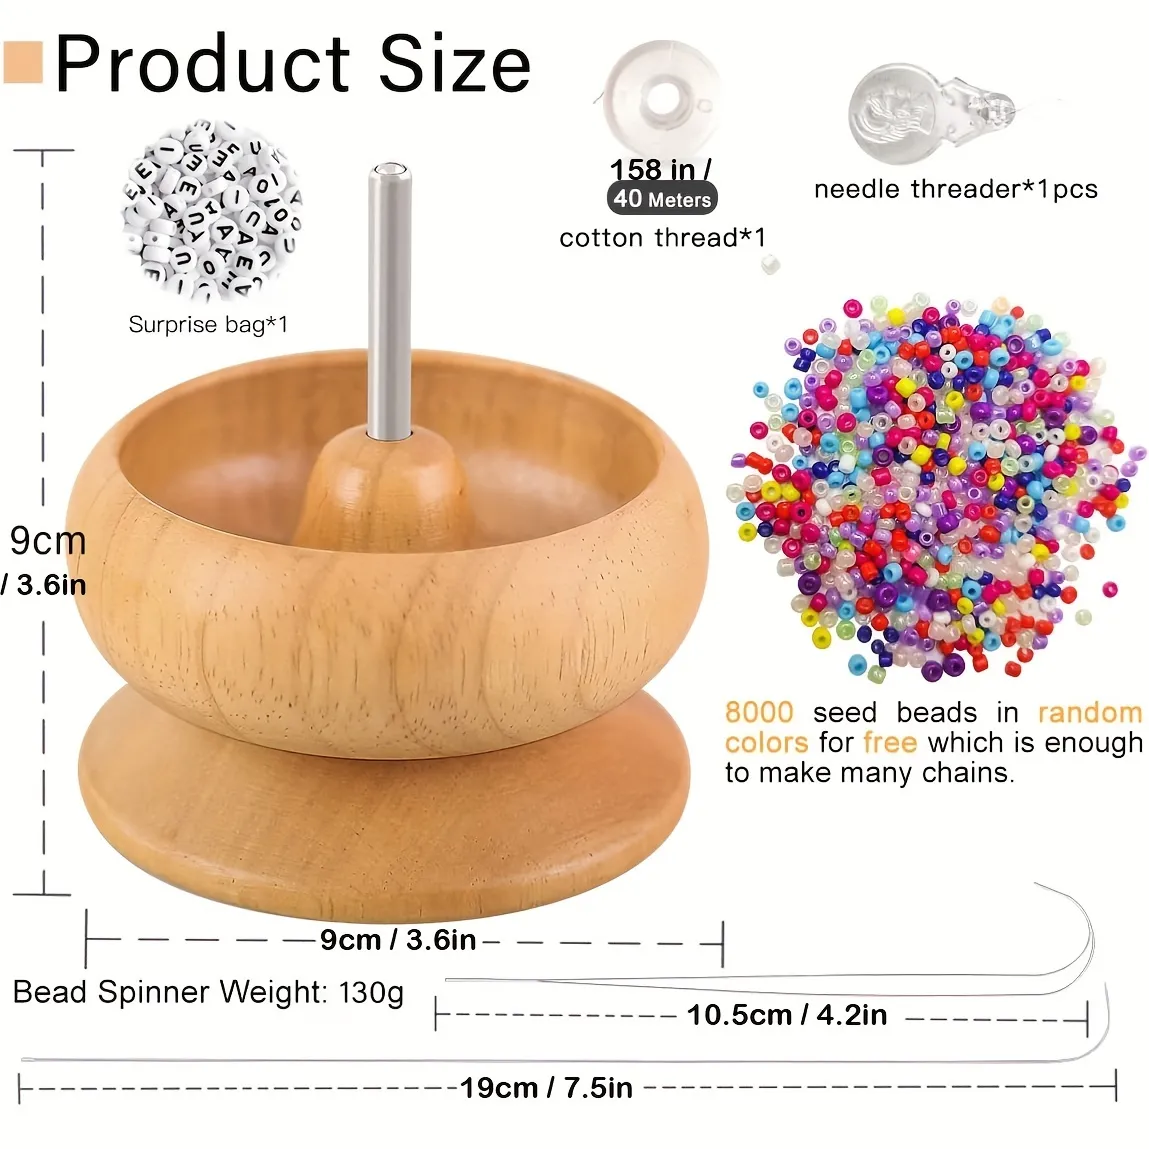 Bead Spinner With 2pcs Beading Needles, 8000pcs Seed Beads And 1 Surprising  Gift Pack For Jewelry Making, Quickly Stringing Beads Tool, Wooden Bead